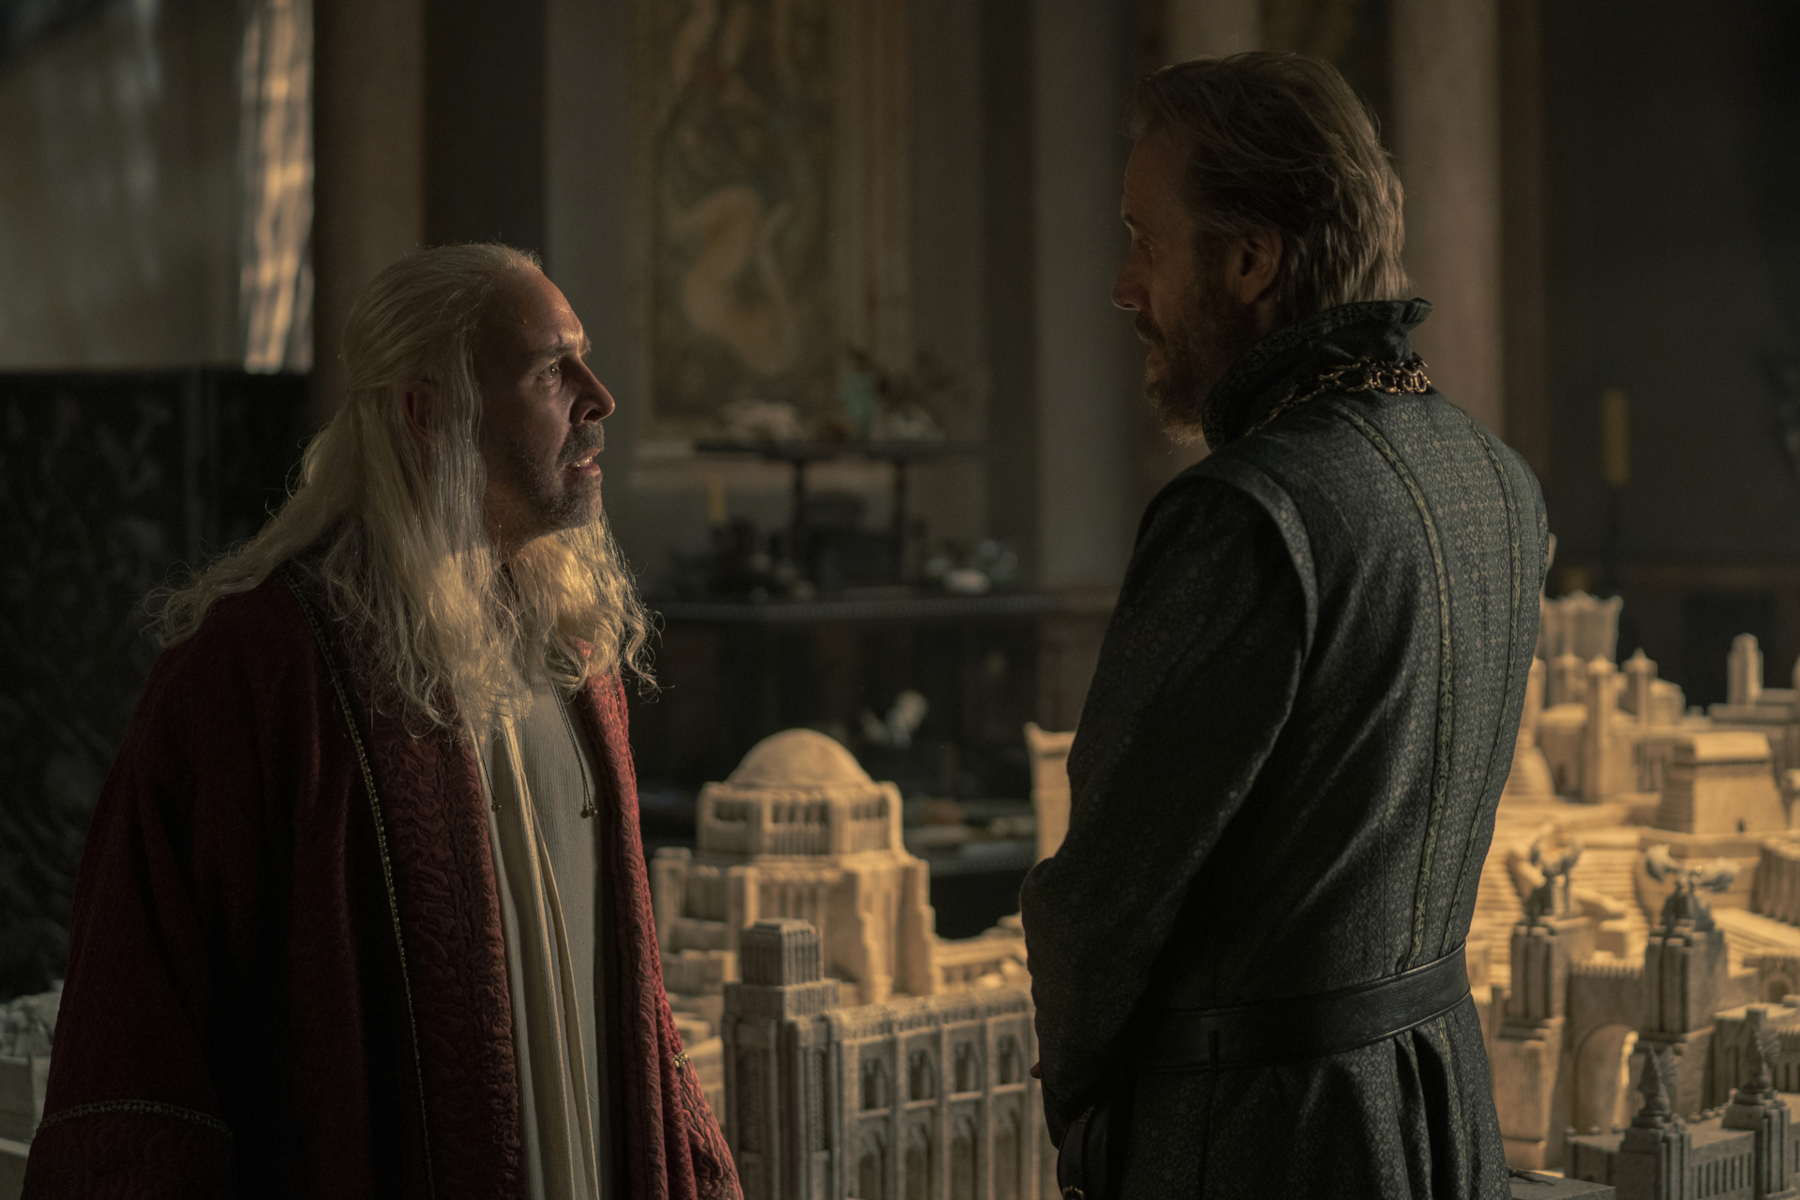 Paddy Considine and Rhys Ifans as King Viserys and Otto Hightower in 'House of the Dragon' Episode 4. They're facing one another, and Viserys looks angry.